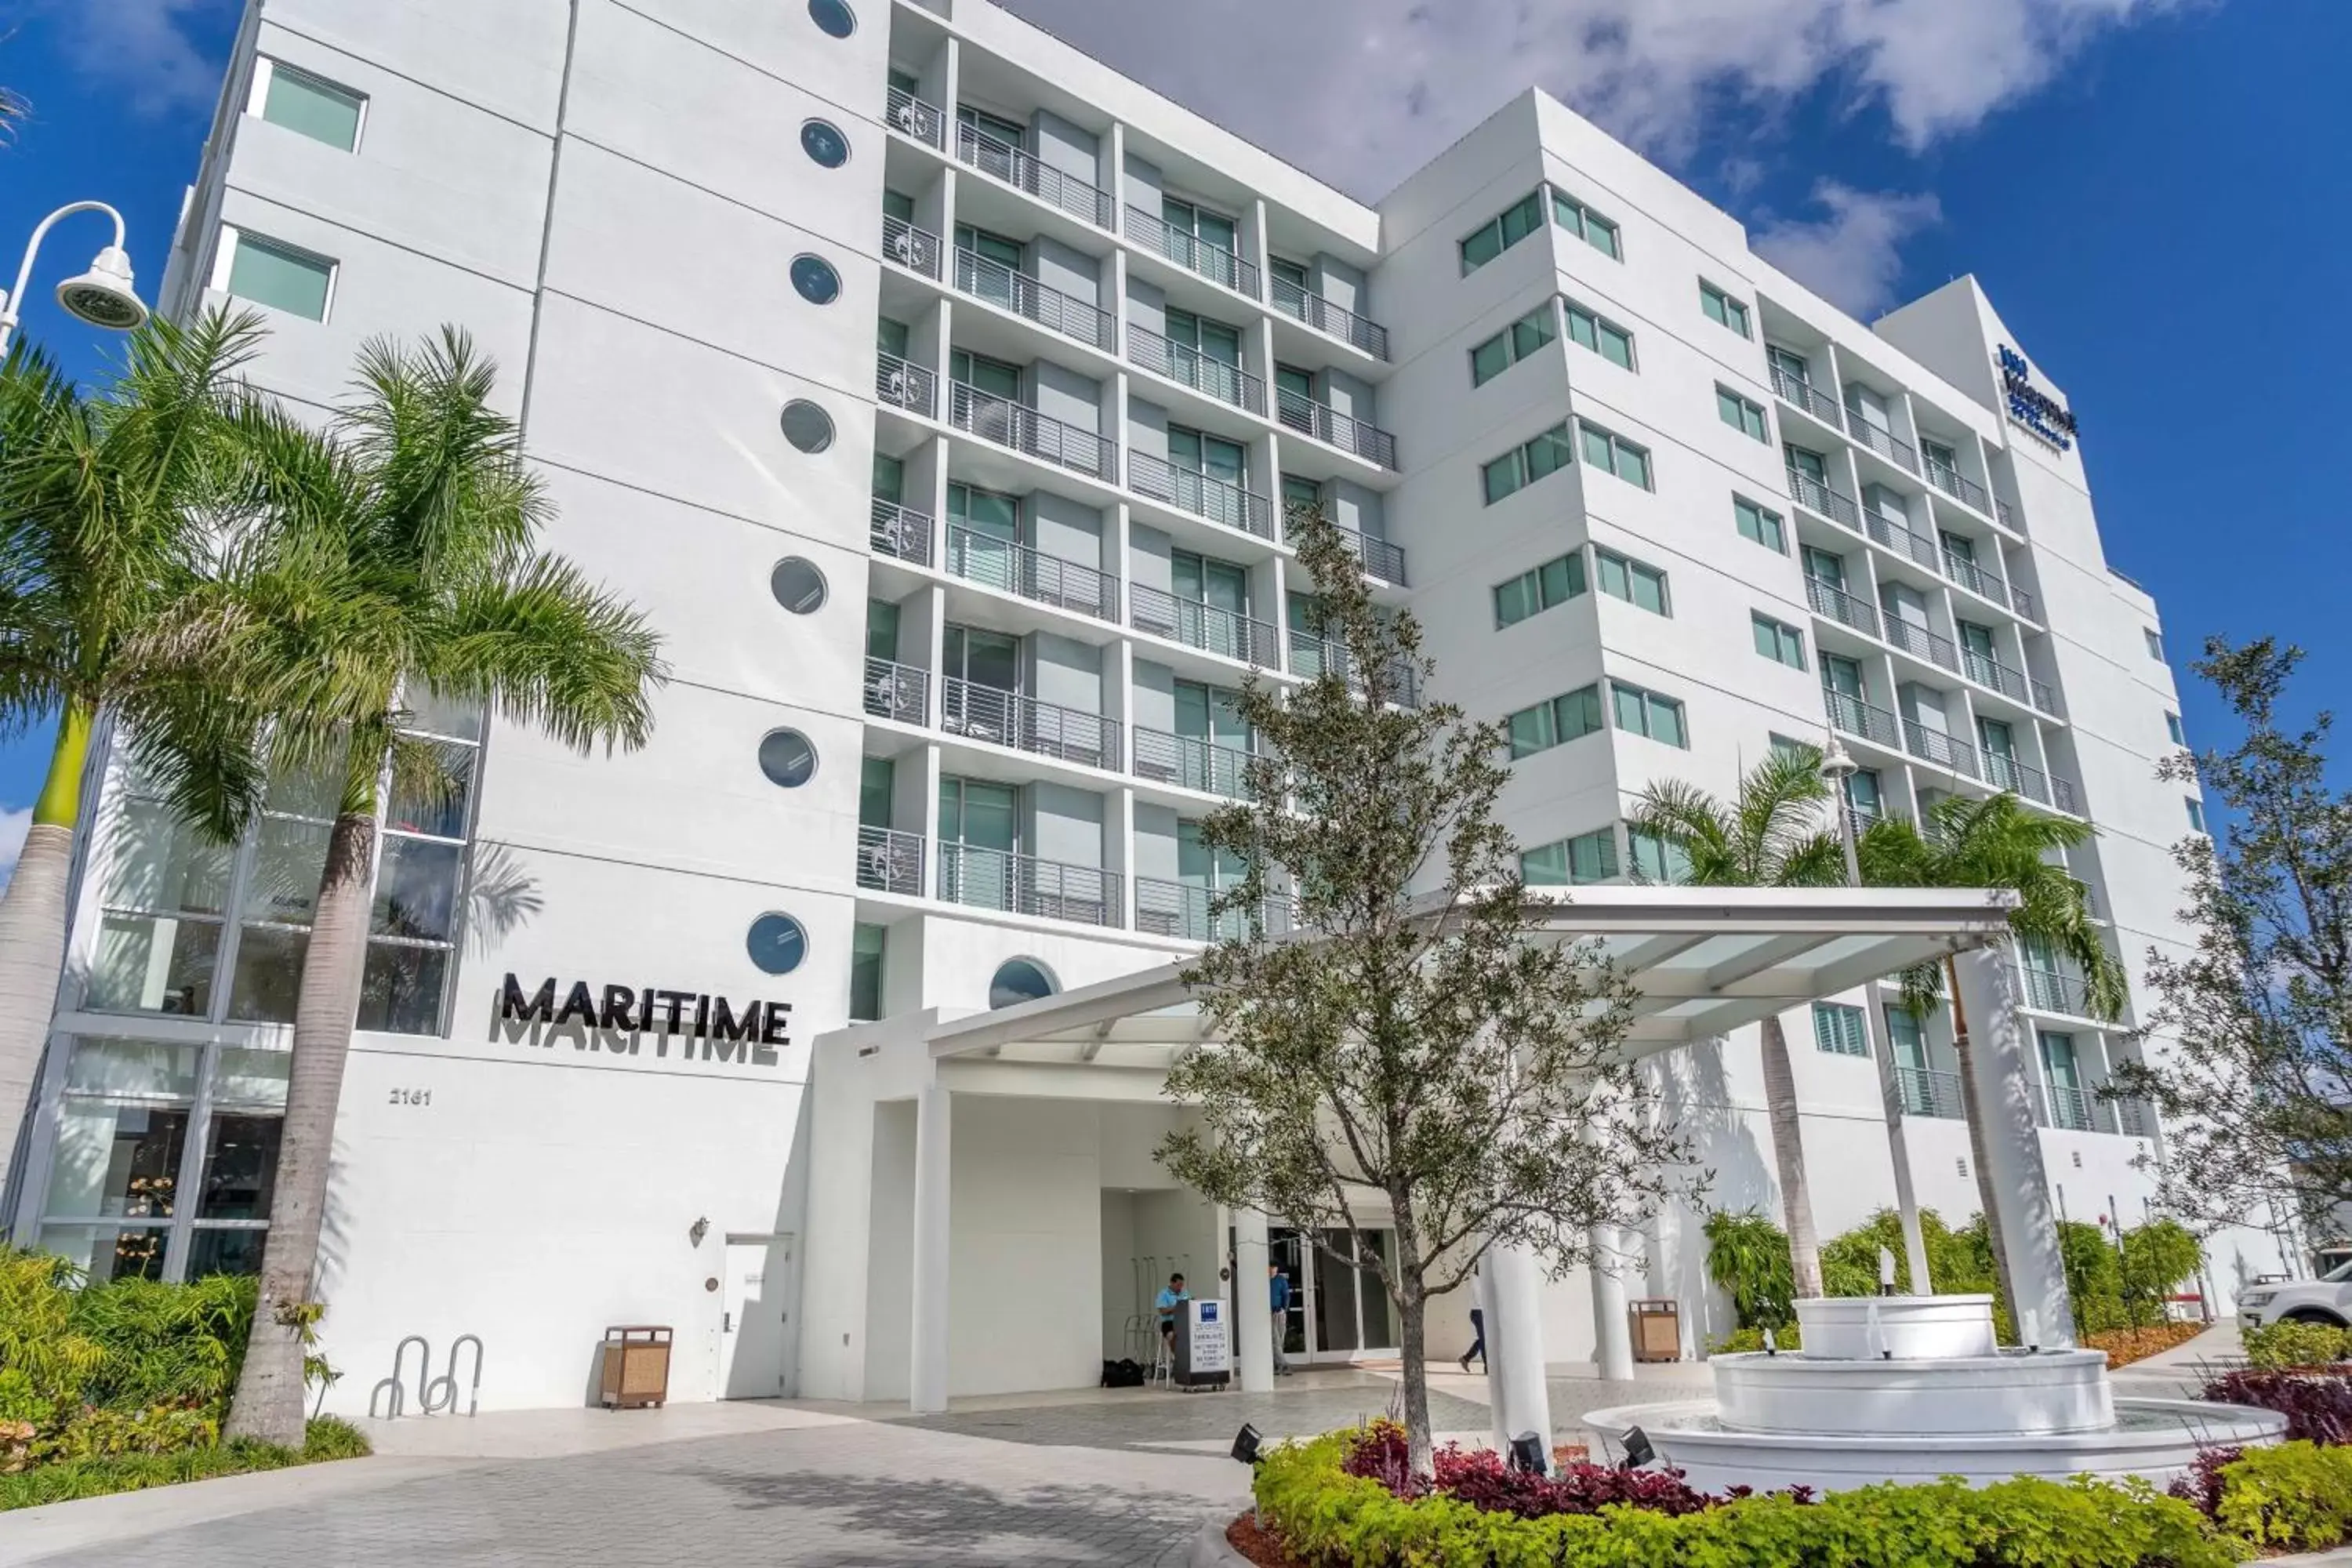 Property Building in Maritime Hotel Fort Lauderdale Cruise Port